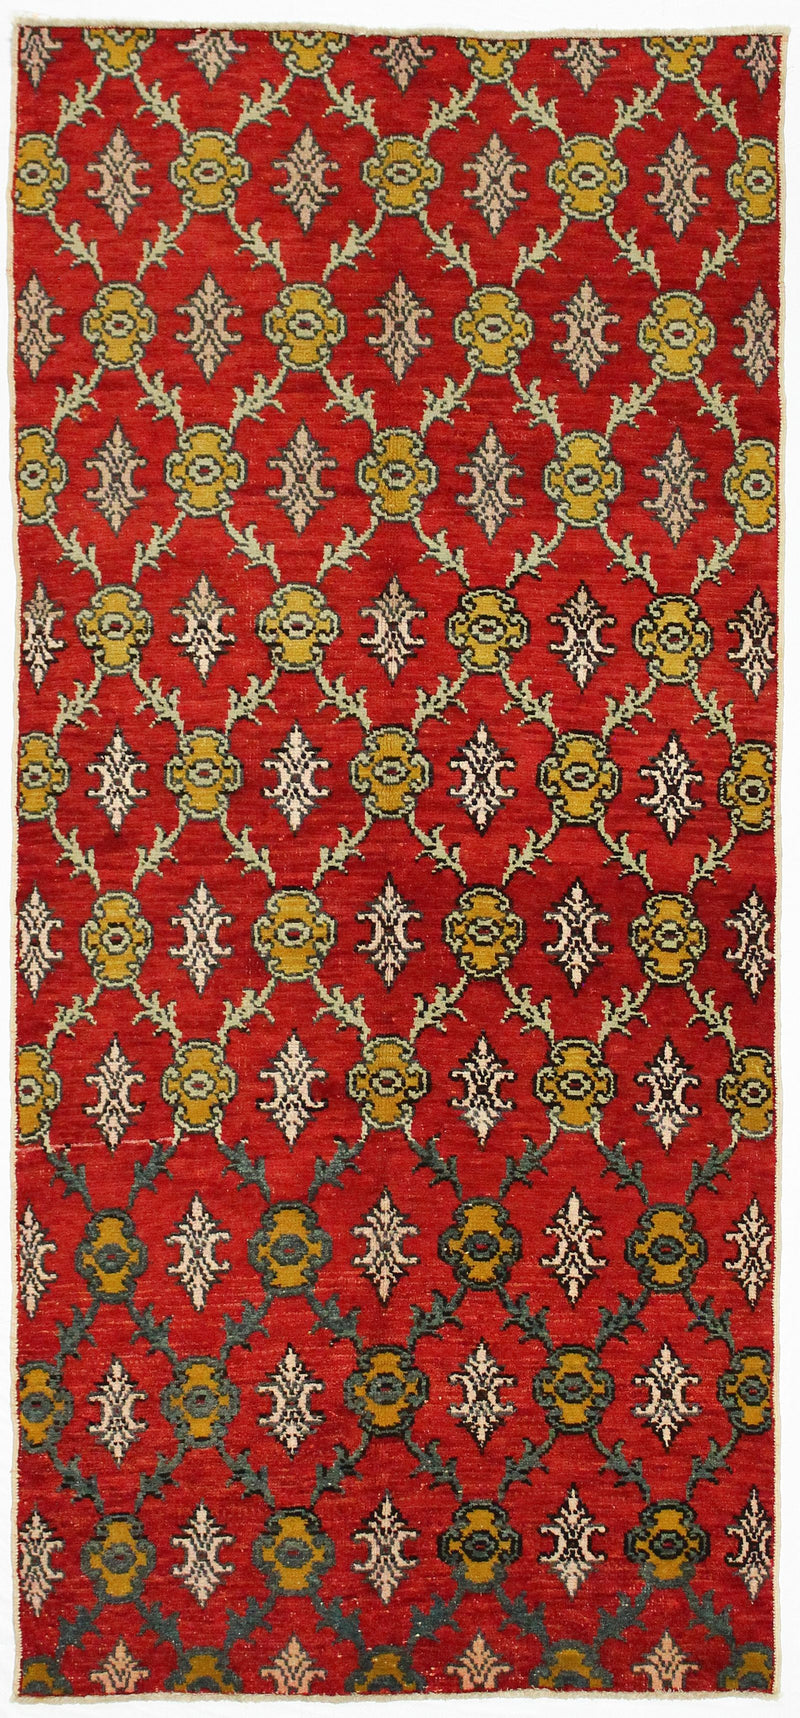 4x8 Red and Gold Turkish Tribal Rug